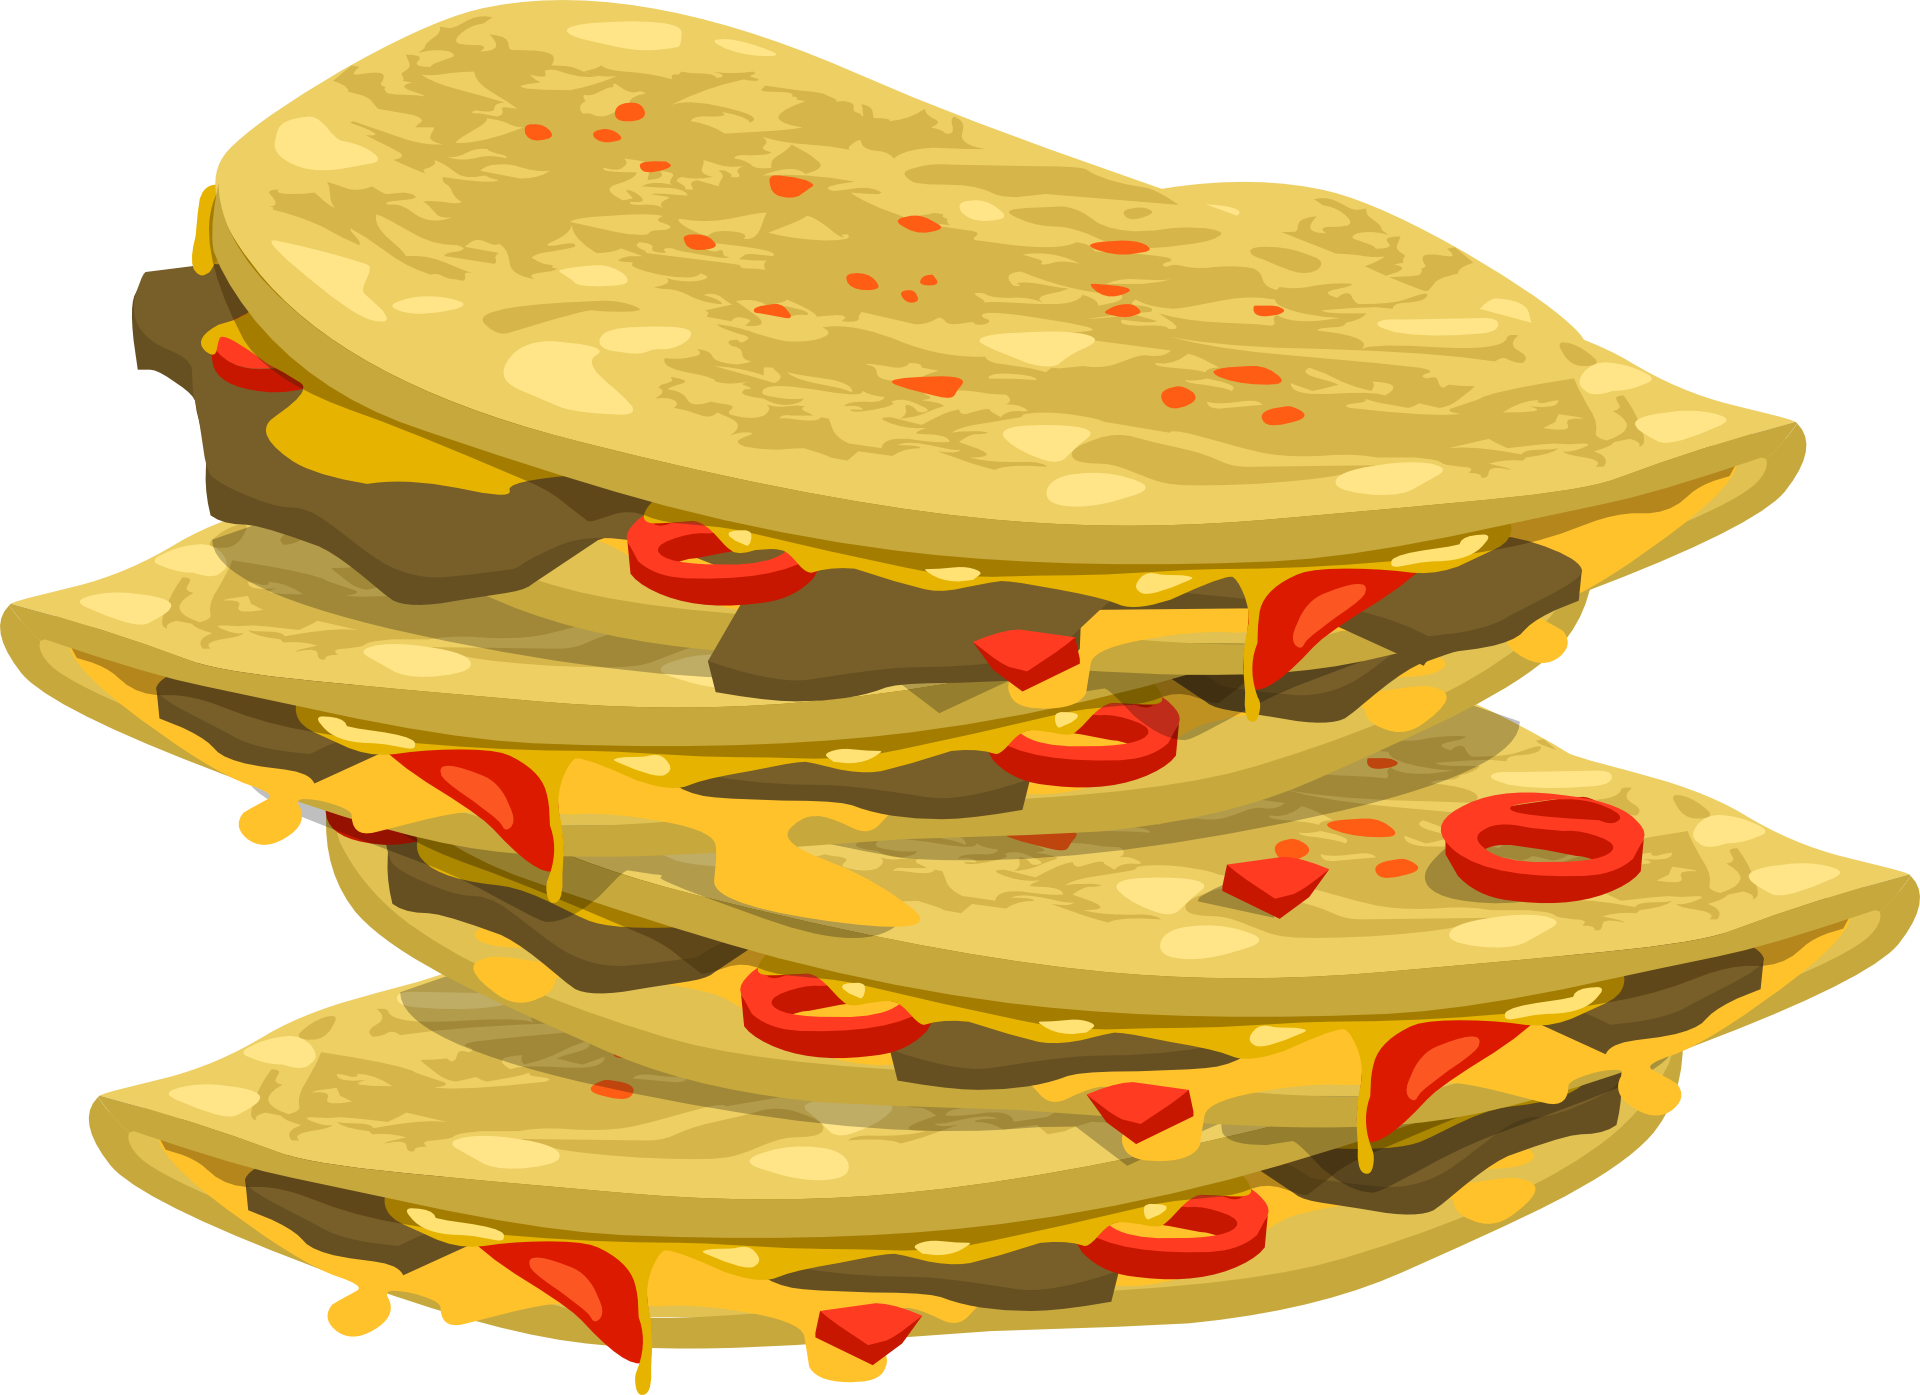 Drawing of quesadilla foods of mexican cuisine free image download